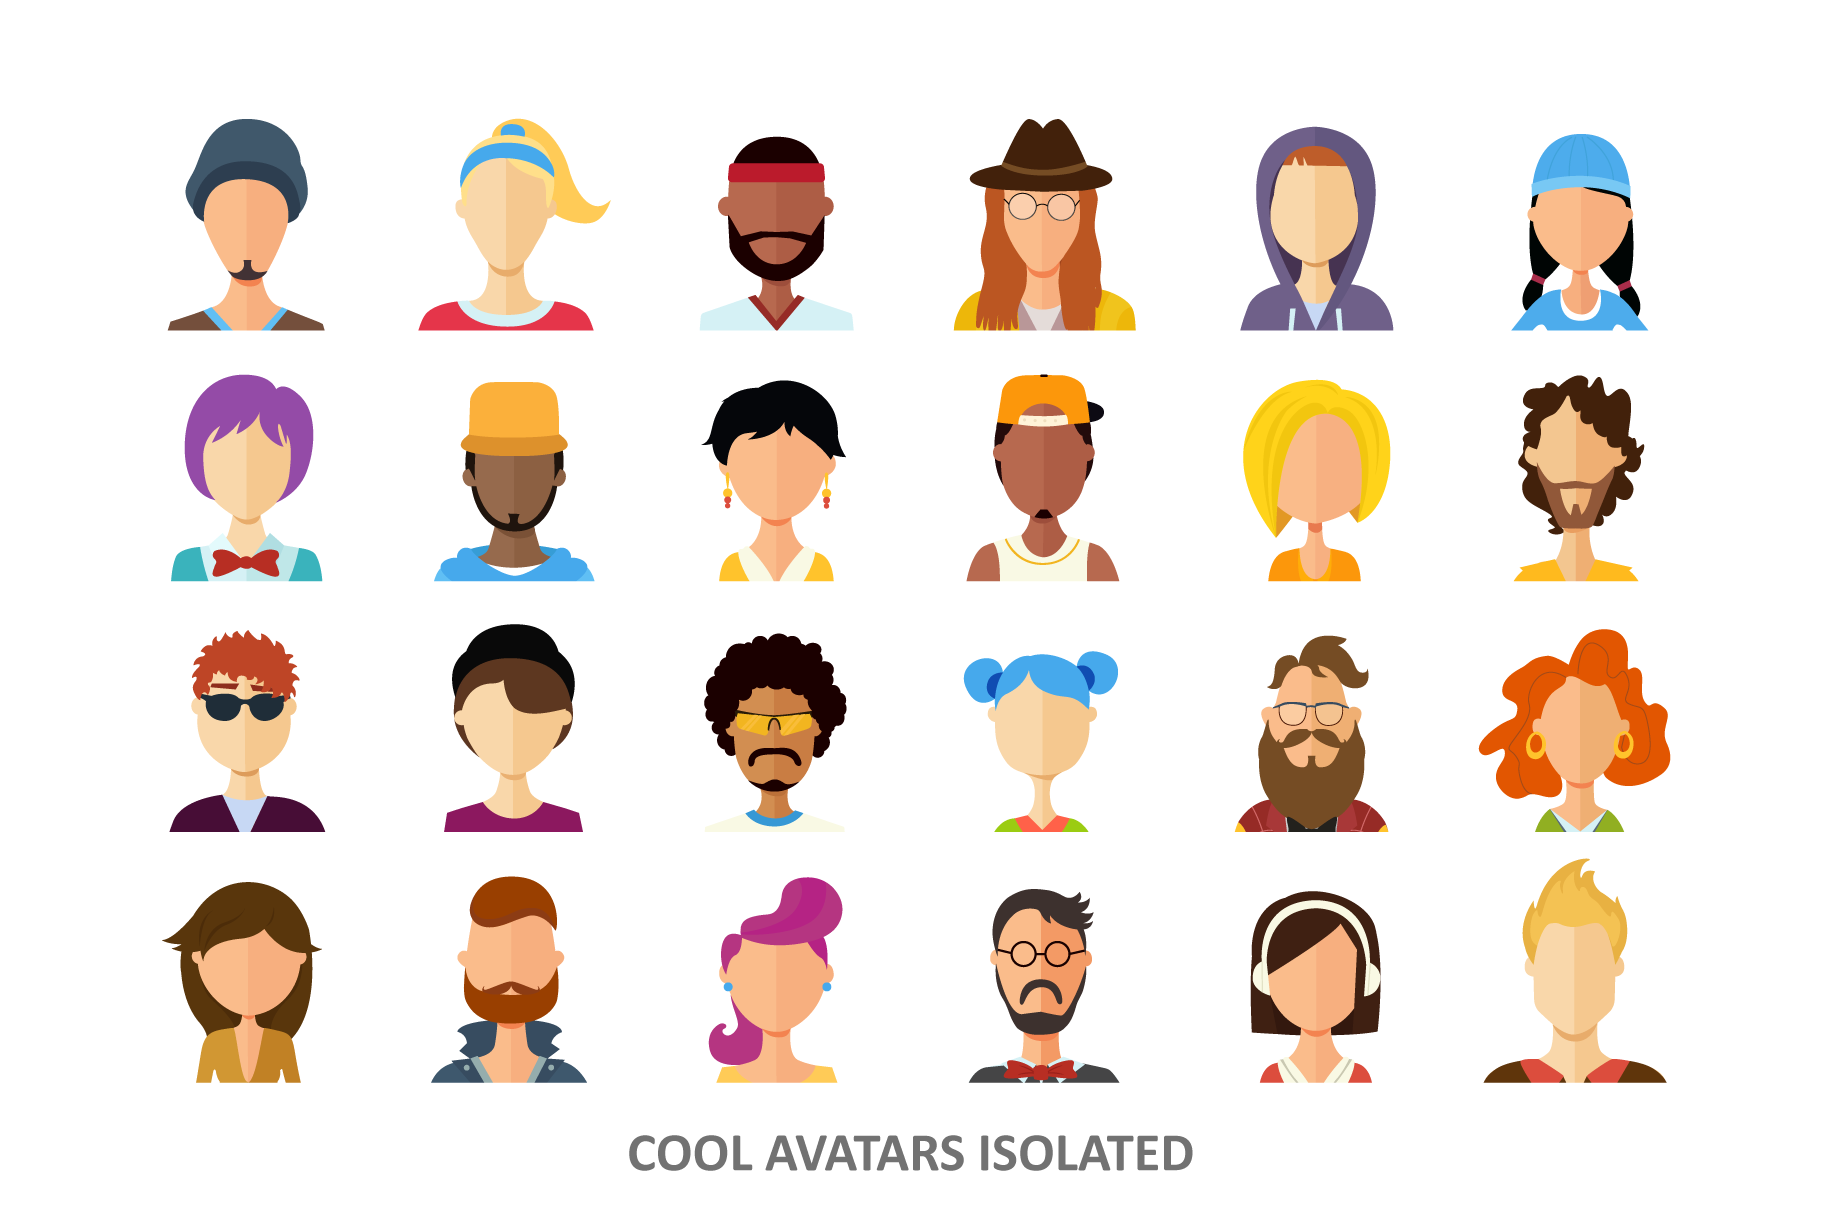 People avatar icon 11459669 PNG